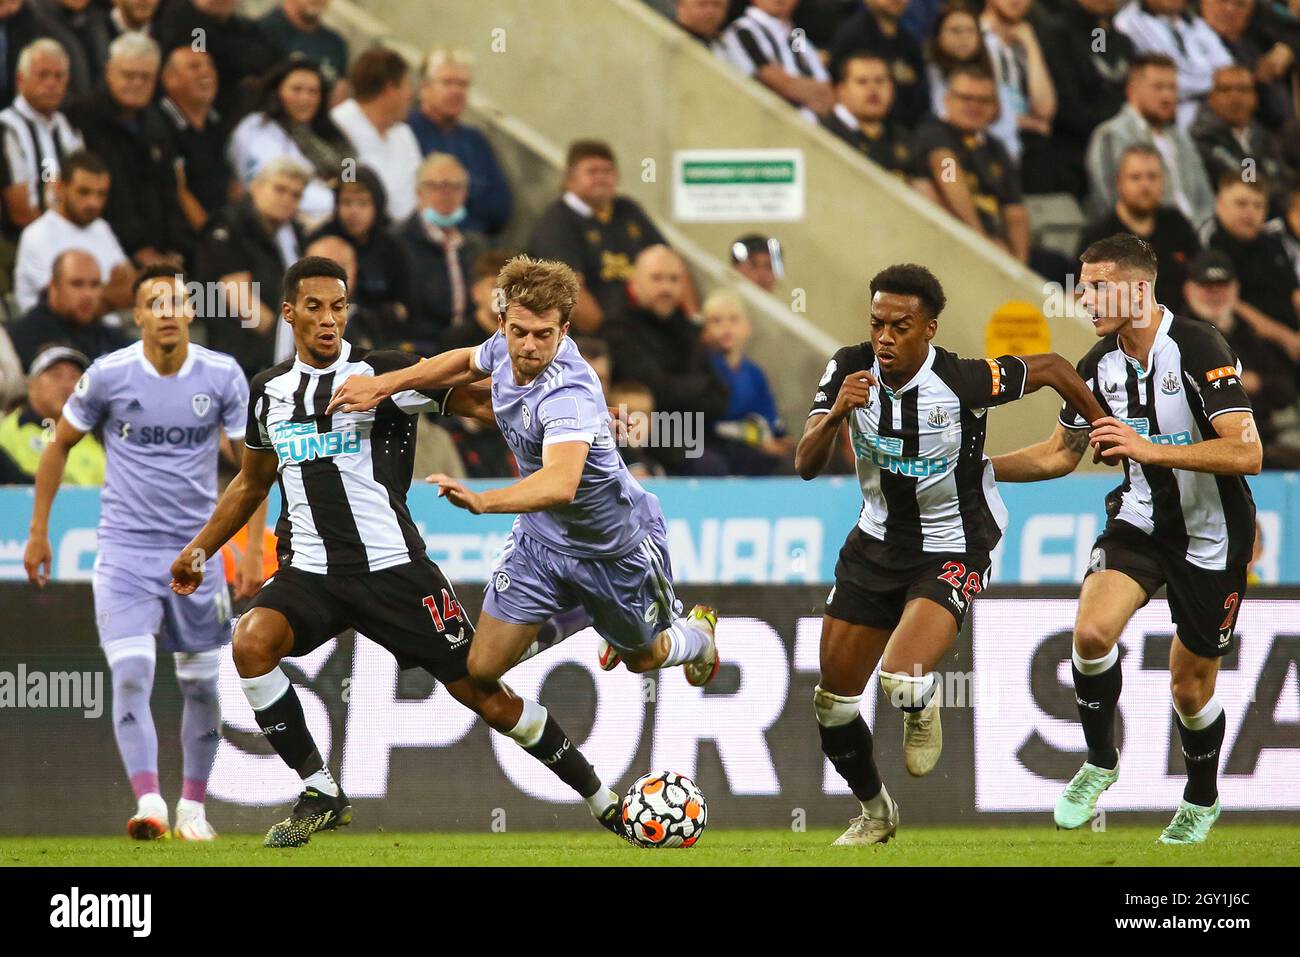 Isaac Hayden of Newcastle United tackles Patrick Bamford of Leeds United - Newcastle United v Leeds United, Premier League, St James' Park, Newcastle upon Tyne, UK - 17th September 2021  Editorial Use Only - DataCo restrictions apply Stock Photo